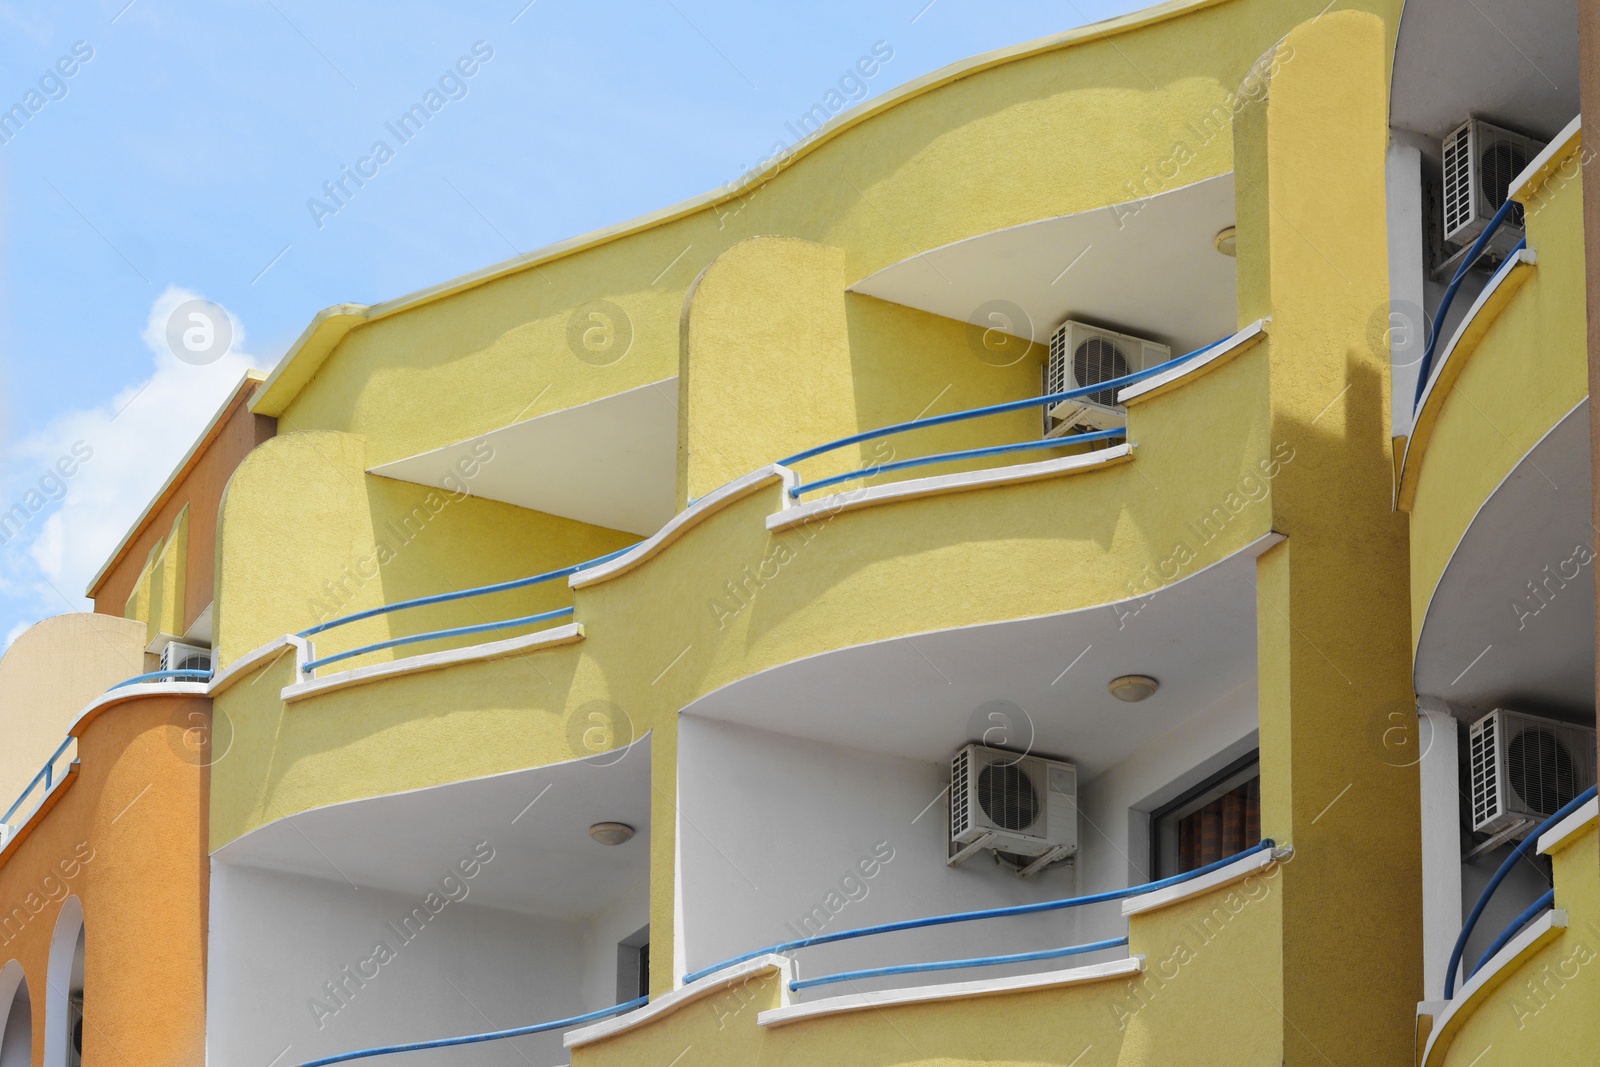 Photo of Exterior of residential building with balconies against blue sky